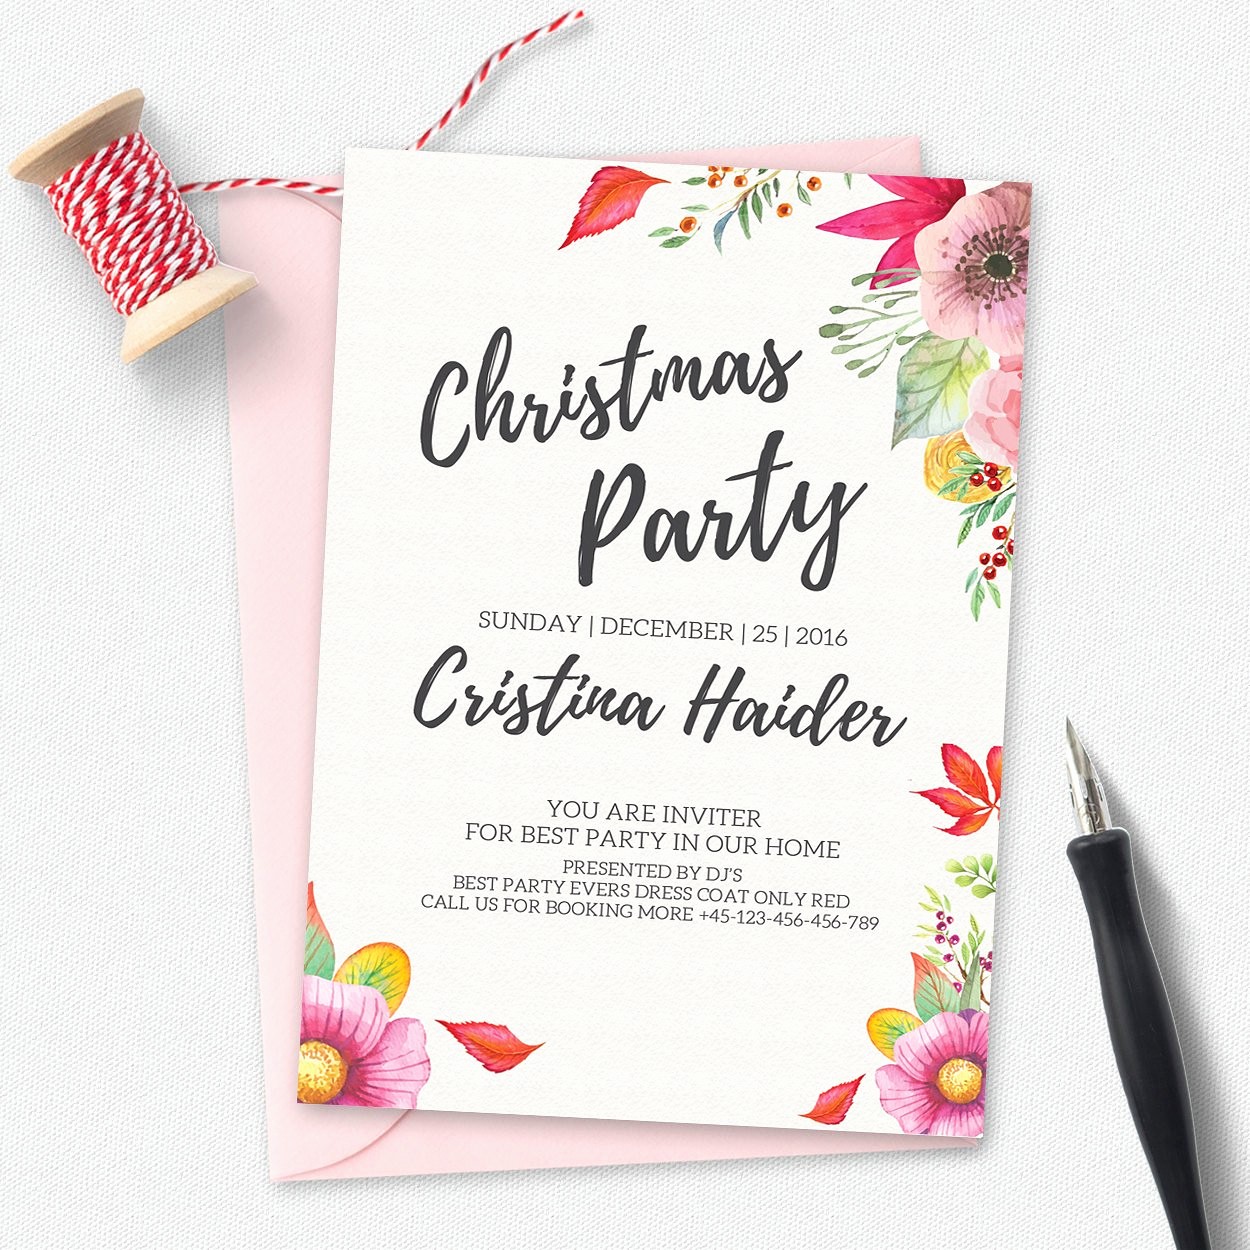 Annual Holiday Party Invitation Template New Christmas Party Invitation Invitation Templates